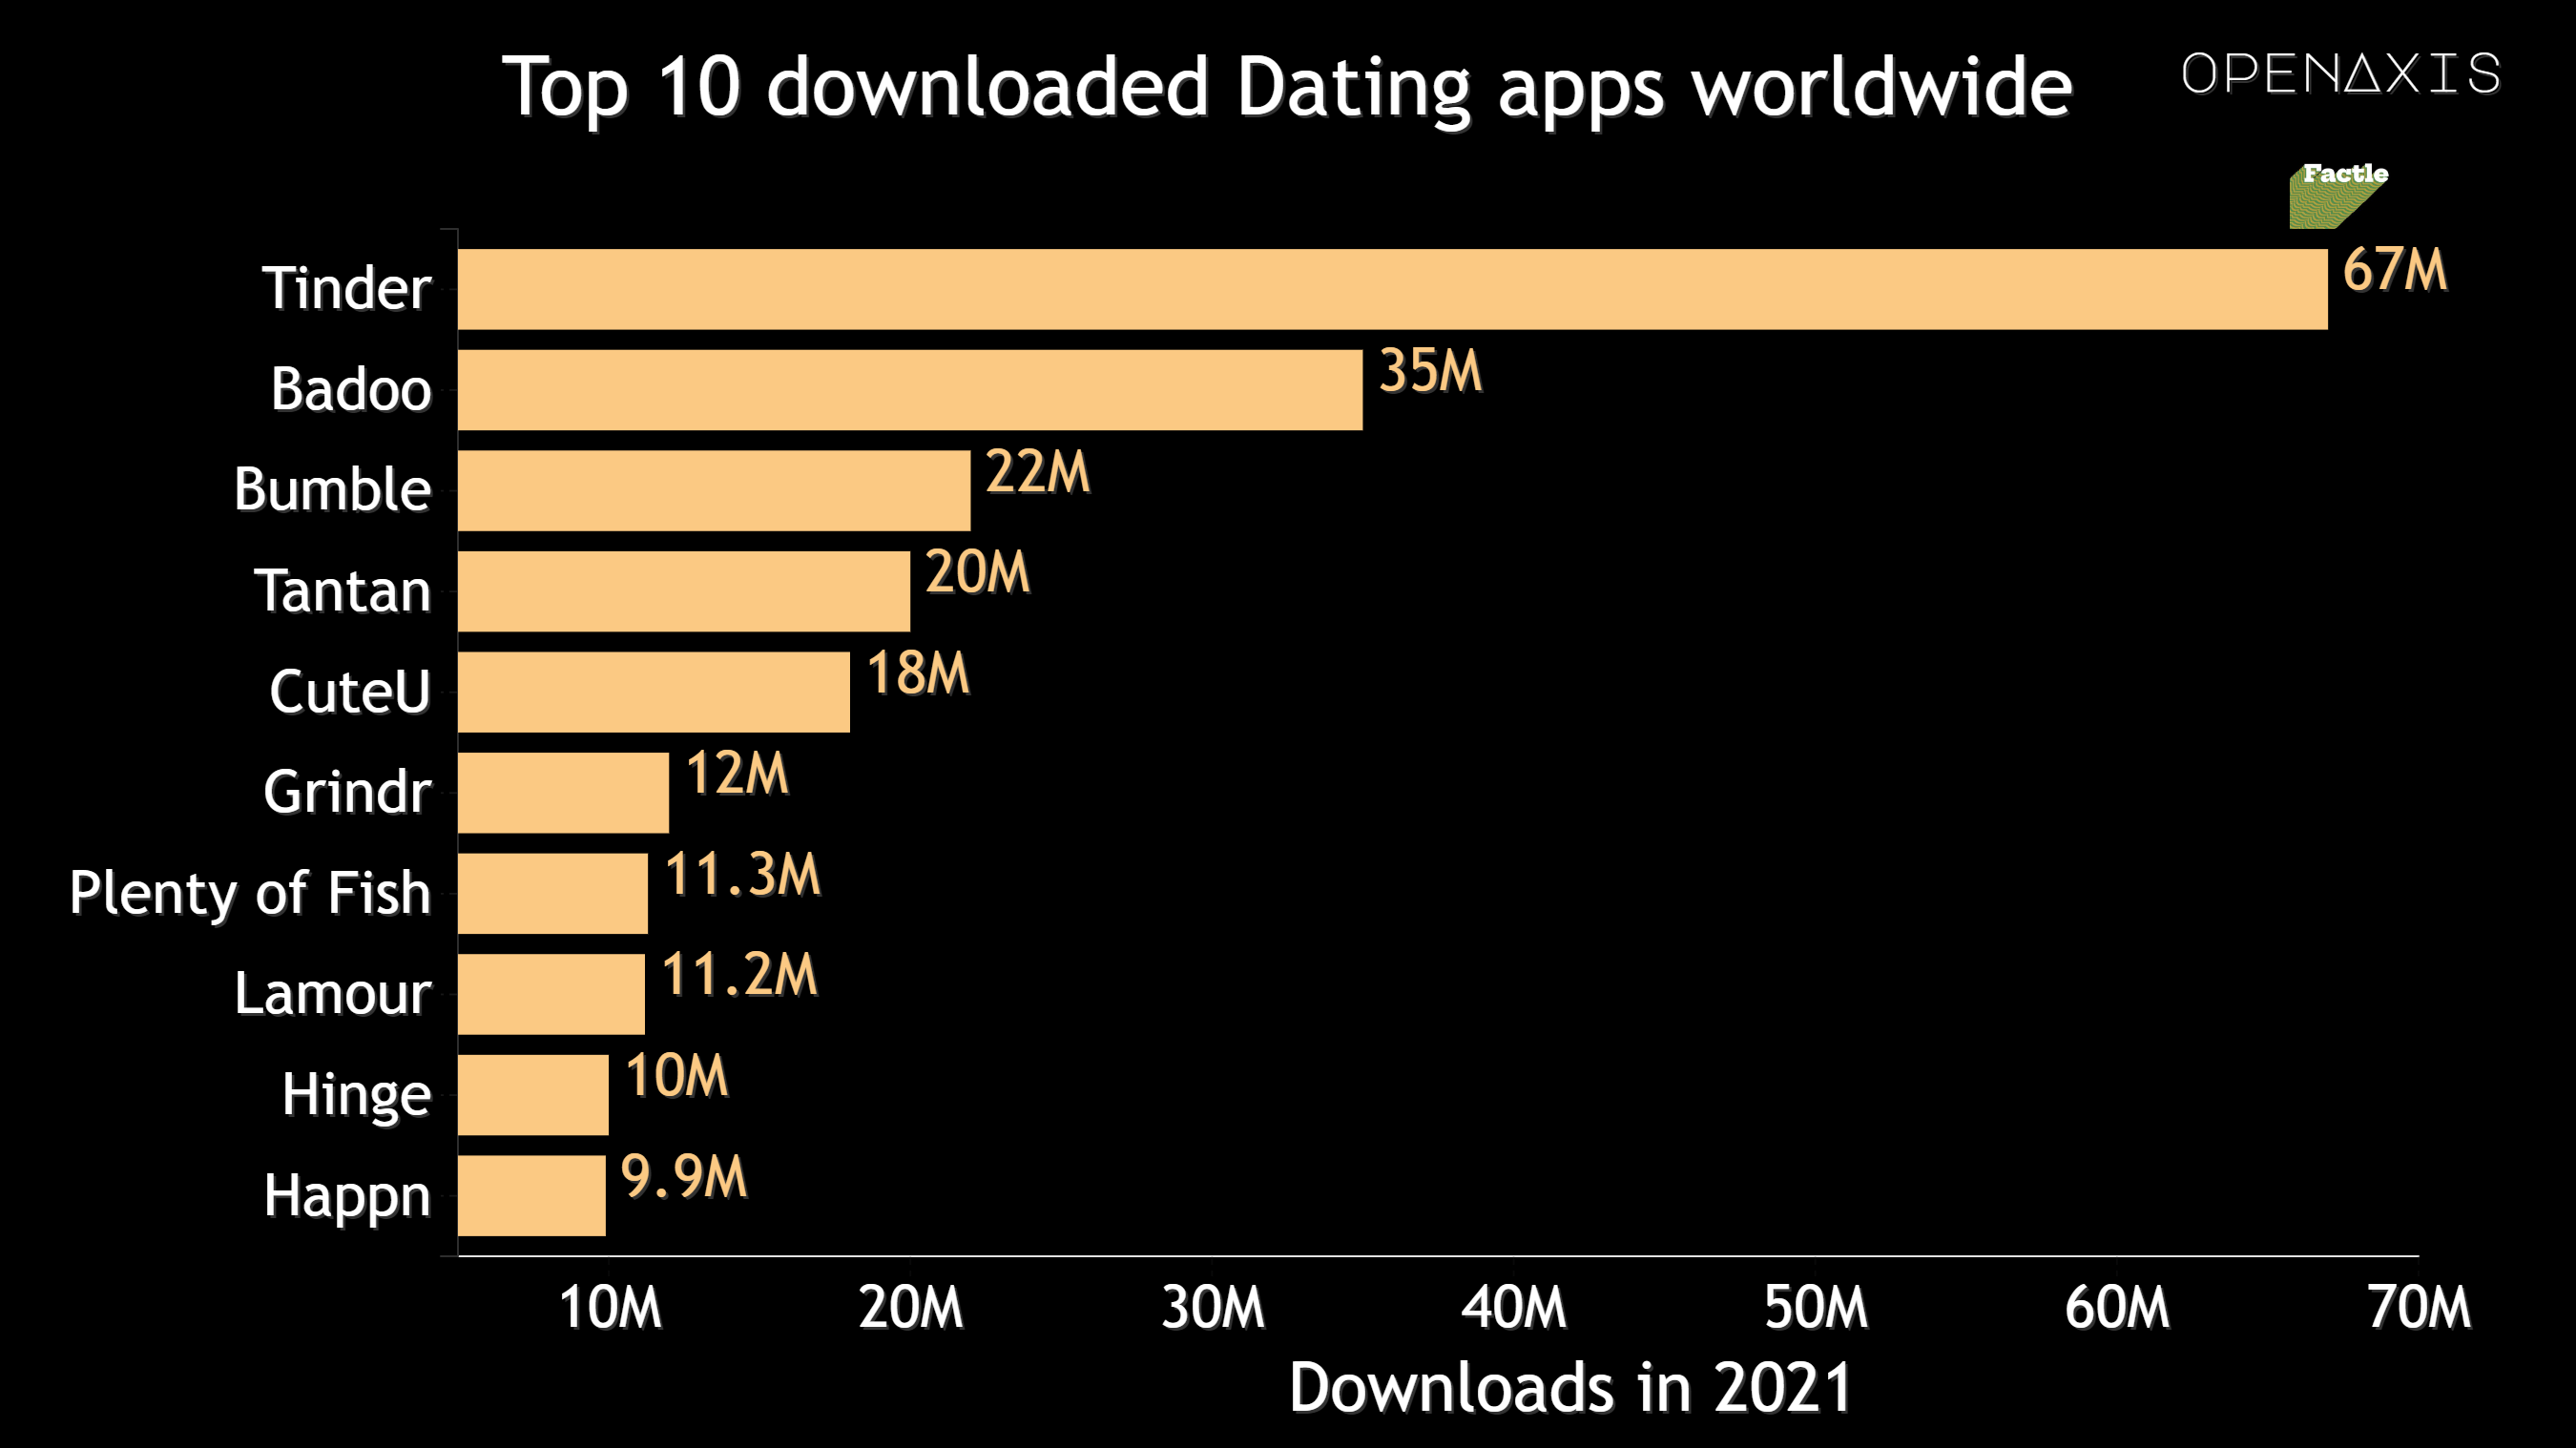 <p>Tinder is the <a href="https://app.openaxis.com/search?q=%231" target="_blank">#1</a> most downloaded dating app worldwide with 67 million, (only 15 million from the United States) more than double it's nearest competitor in Badoo at 35,000,000.</p><p><span data-index="0" data-denotation-char data-id="0" data-value="&lt;a href=&quot;/search?q=%23dating&quot; target=_self&gt;#dating" data-link="/search?q=%23dating">﻿<span contenteditable="false"><span></span><a href="/search?q=%23dating" target="_self">#dating</a></span>﻿</span> <span data-index="0" data-denotation-char data-id="0" data-value="&lt;a href=&quot;/search?q=%23trivia&quot; target=_self&gt;#trivia" data-link="/search?q=%23trivia">﻿<span contenteditable="false"><span></span><a href="/search?q=%23trivia" target="_self">#trivia</a></span>﻿</span> </p><p>Source: <a href="/data/3617" target="_blank">Apptopia</a></p>